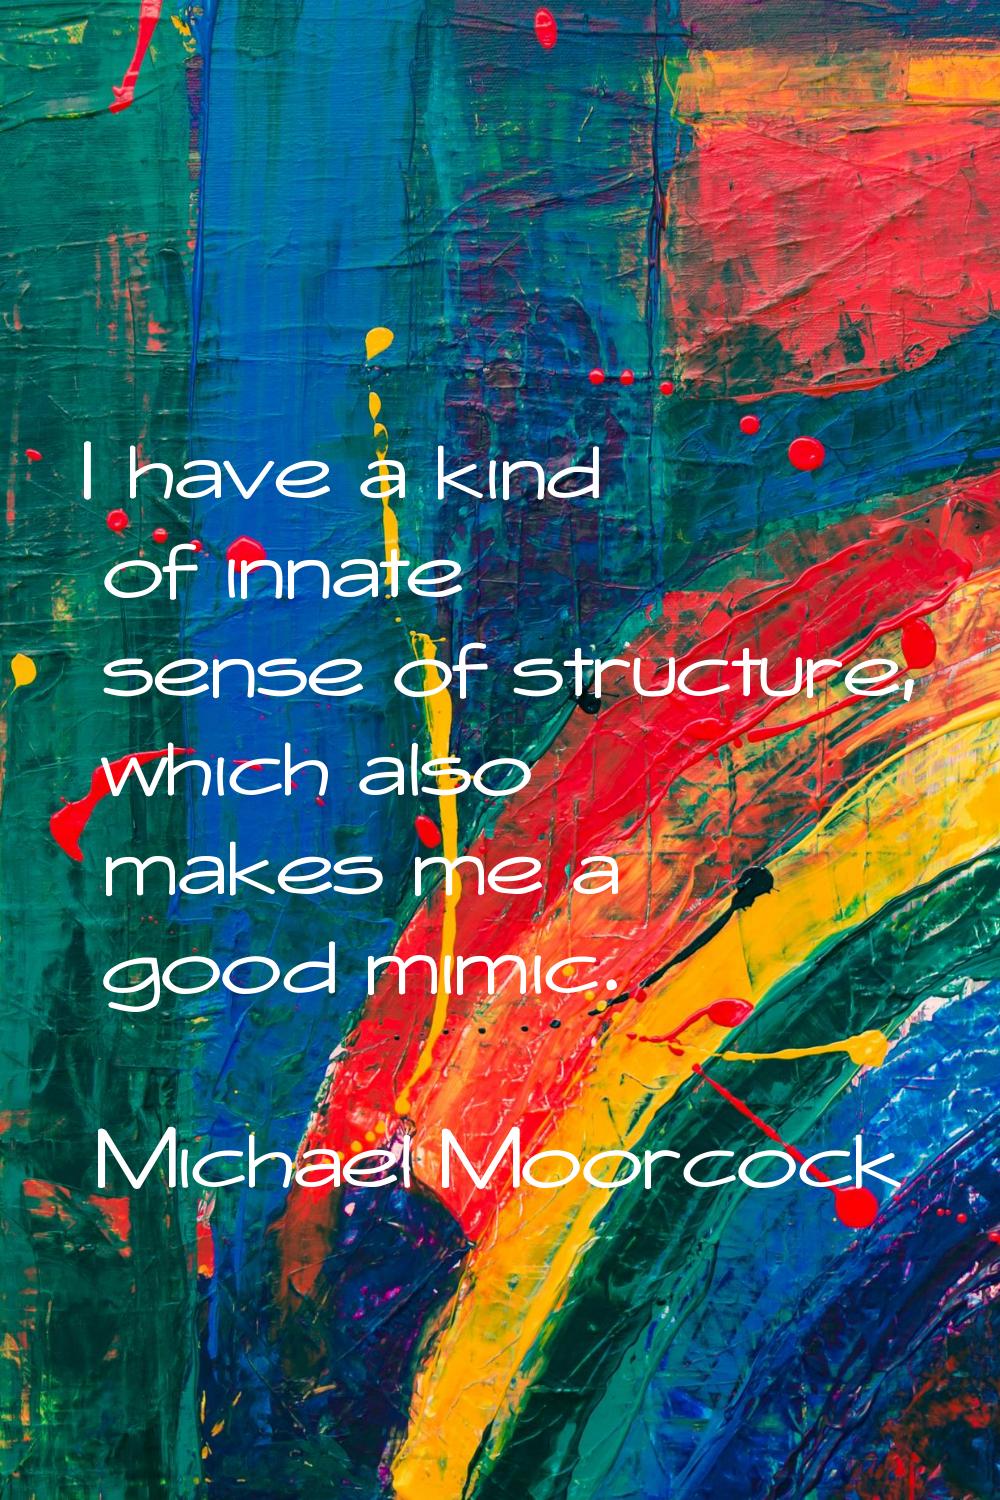 I have a kind of innate sense of structure, which also makes me a good mimic.